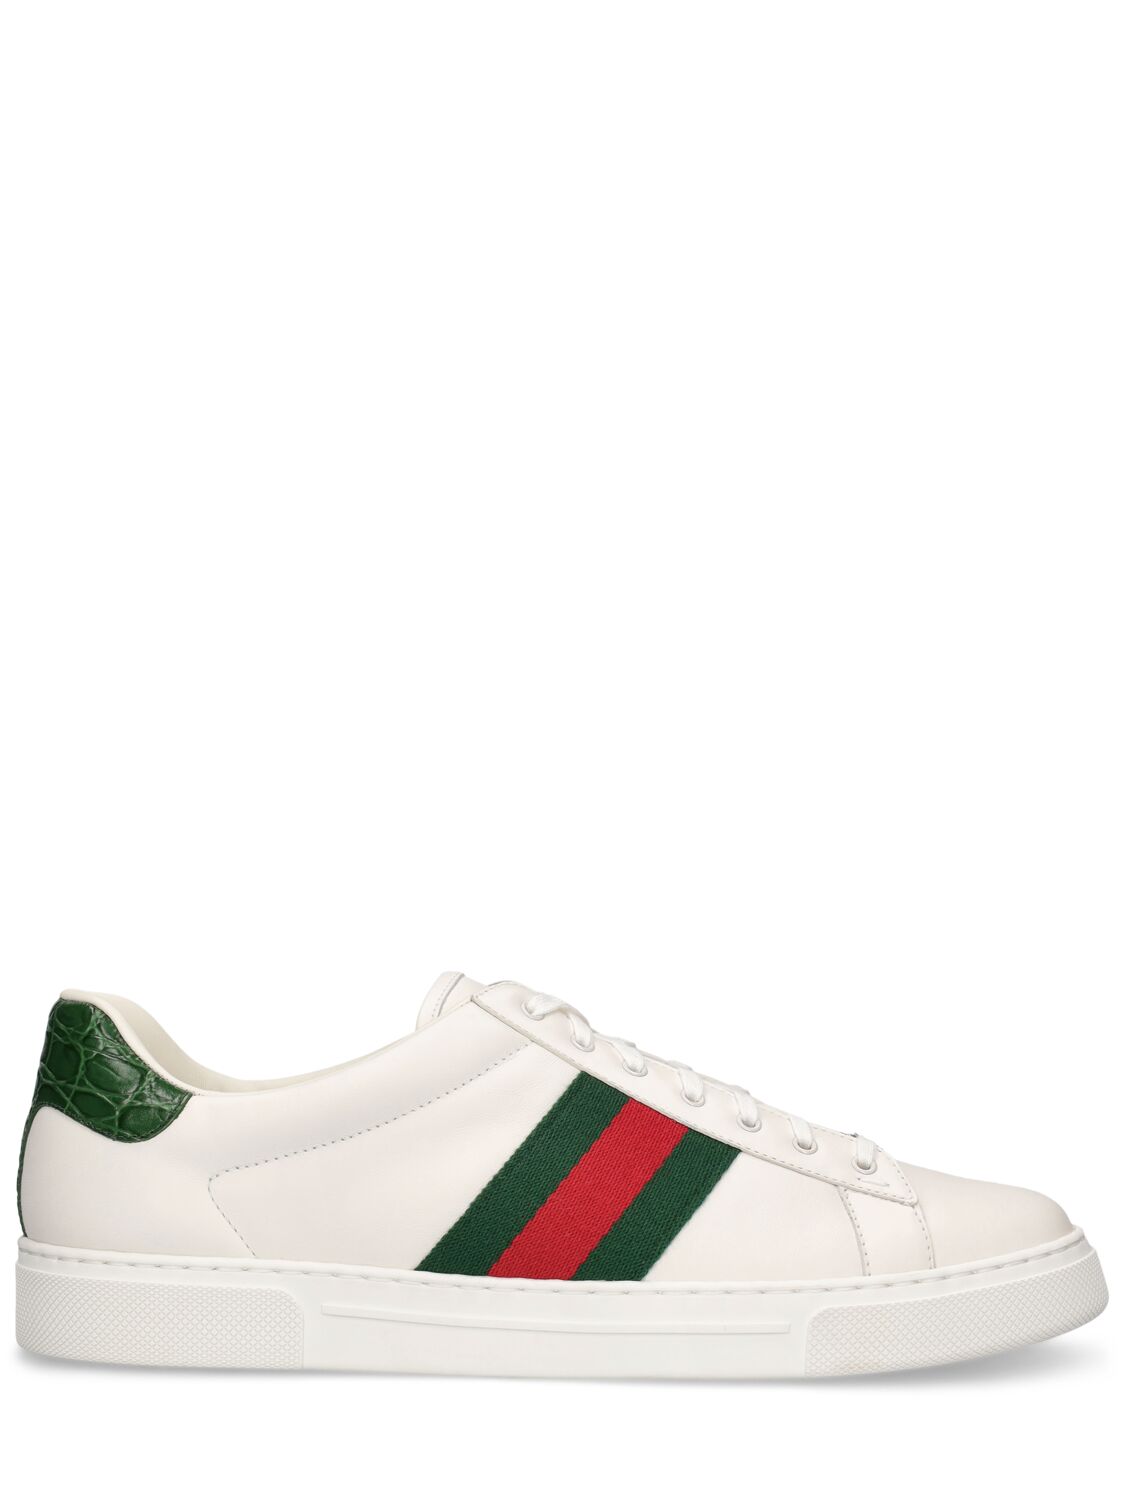 Gucci New Ace Sneaker In White | ModeSens